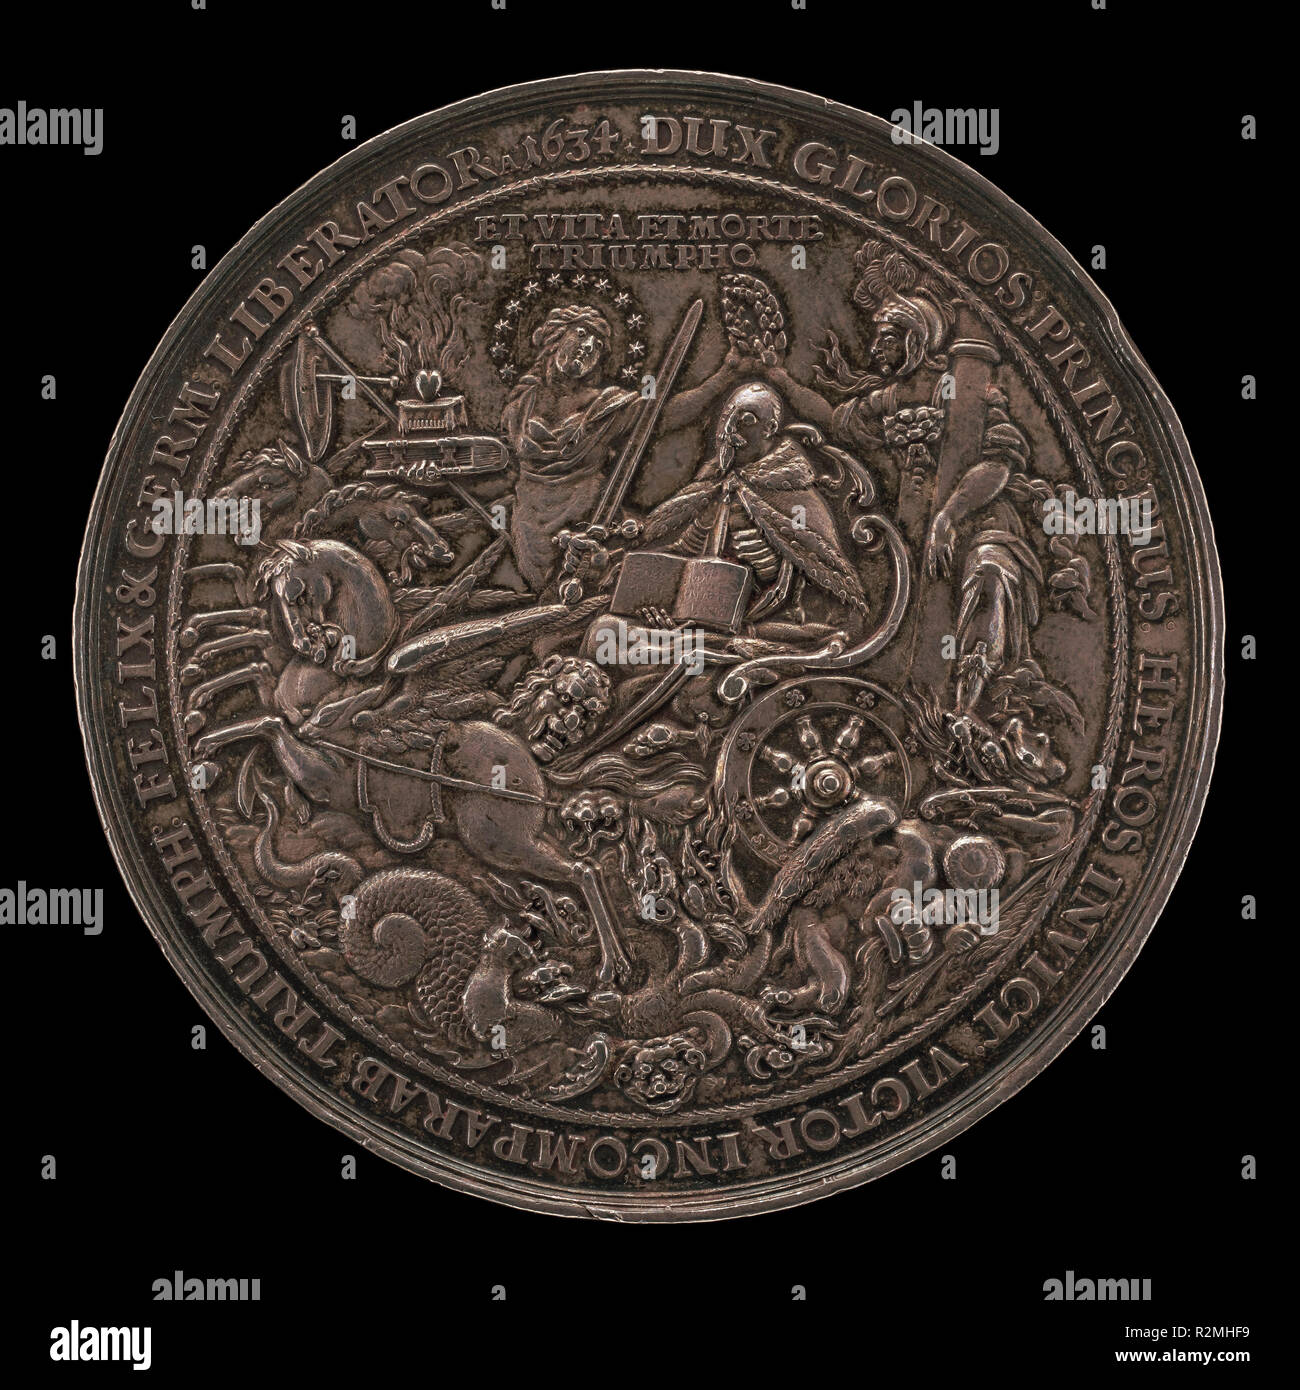 Death of Gustavus II Adolphus, 1594-1632, King of Sweden 1611 [obverse]. Dated: 1634. Dimensions: overall (diameter): 7.91 cm (3 1/8 in.)  gross weight: 150.28 gr (0.331 lb.)  axis: 12:00. Medium: silver. Museum: National Gallery of Art, Washington DC. Author: Sebastian Dadler. Stock Photo